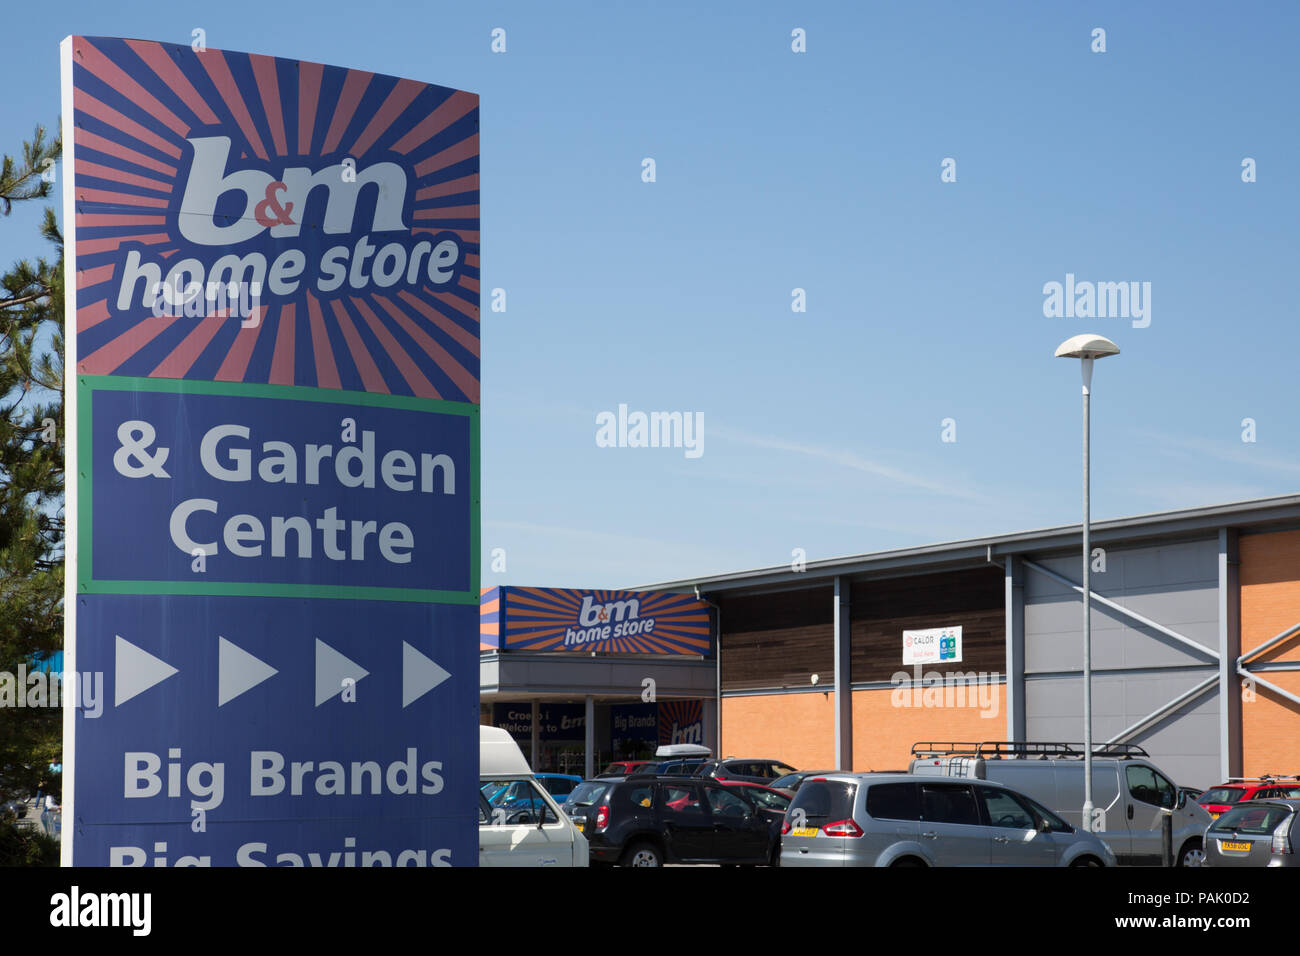 B&M Home Store, Holyhead, Anglesey, Wales Stock Photo